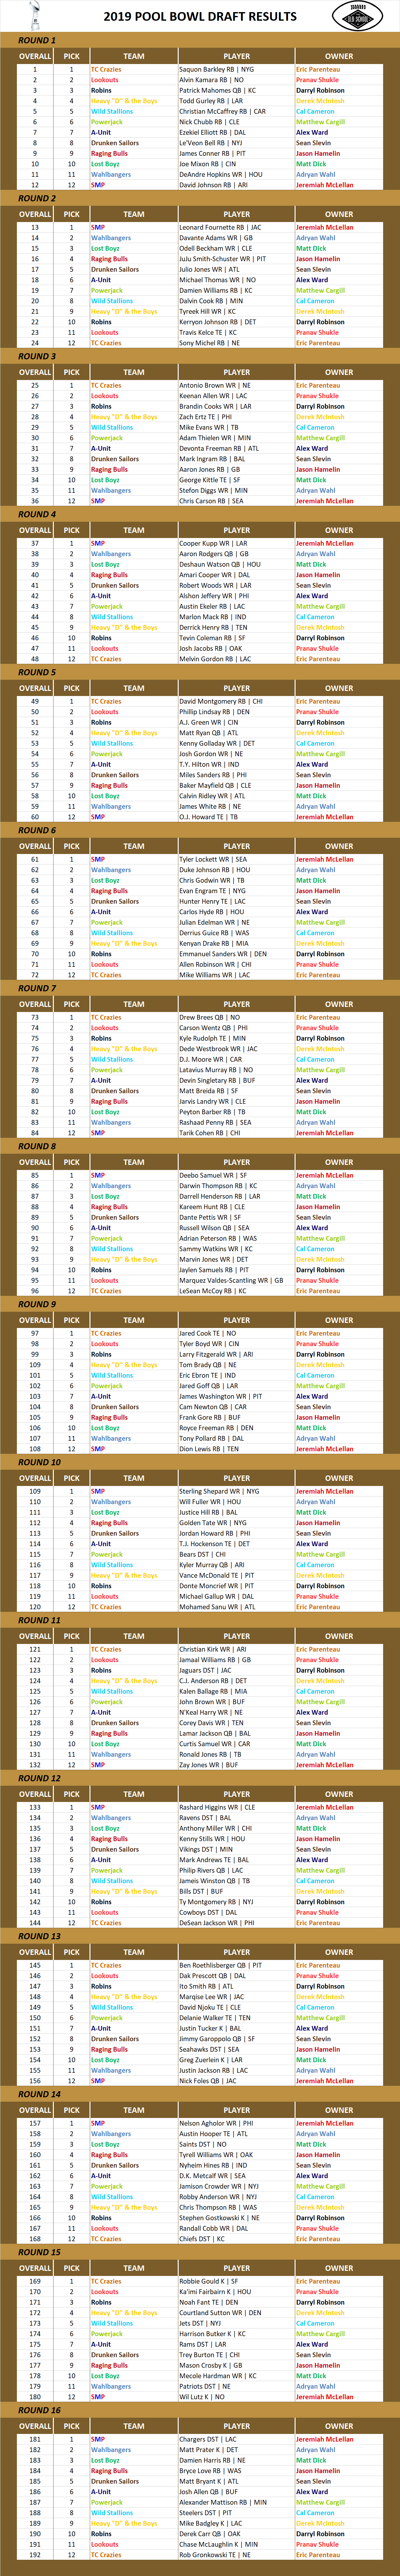 2019 National Football League Pool Draft Results